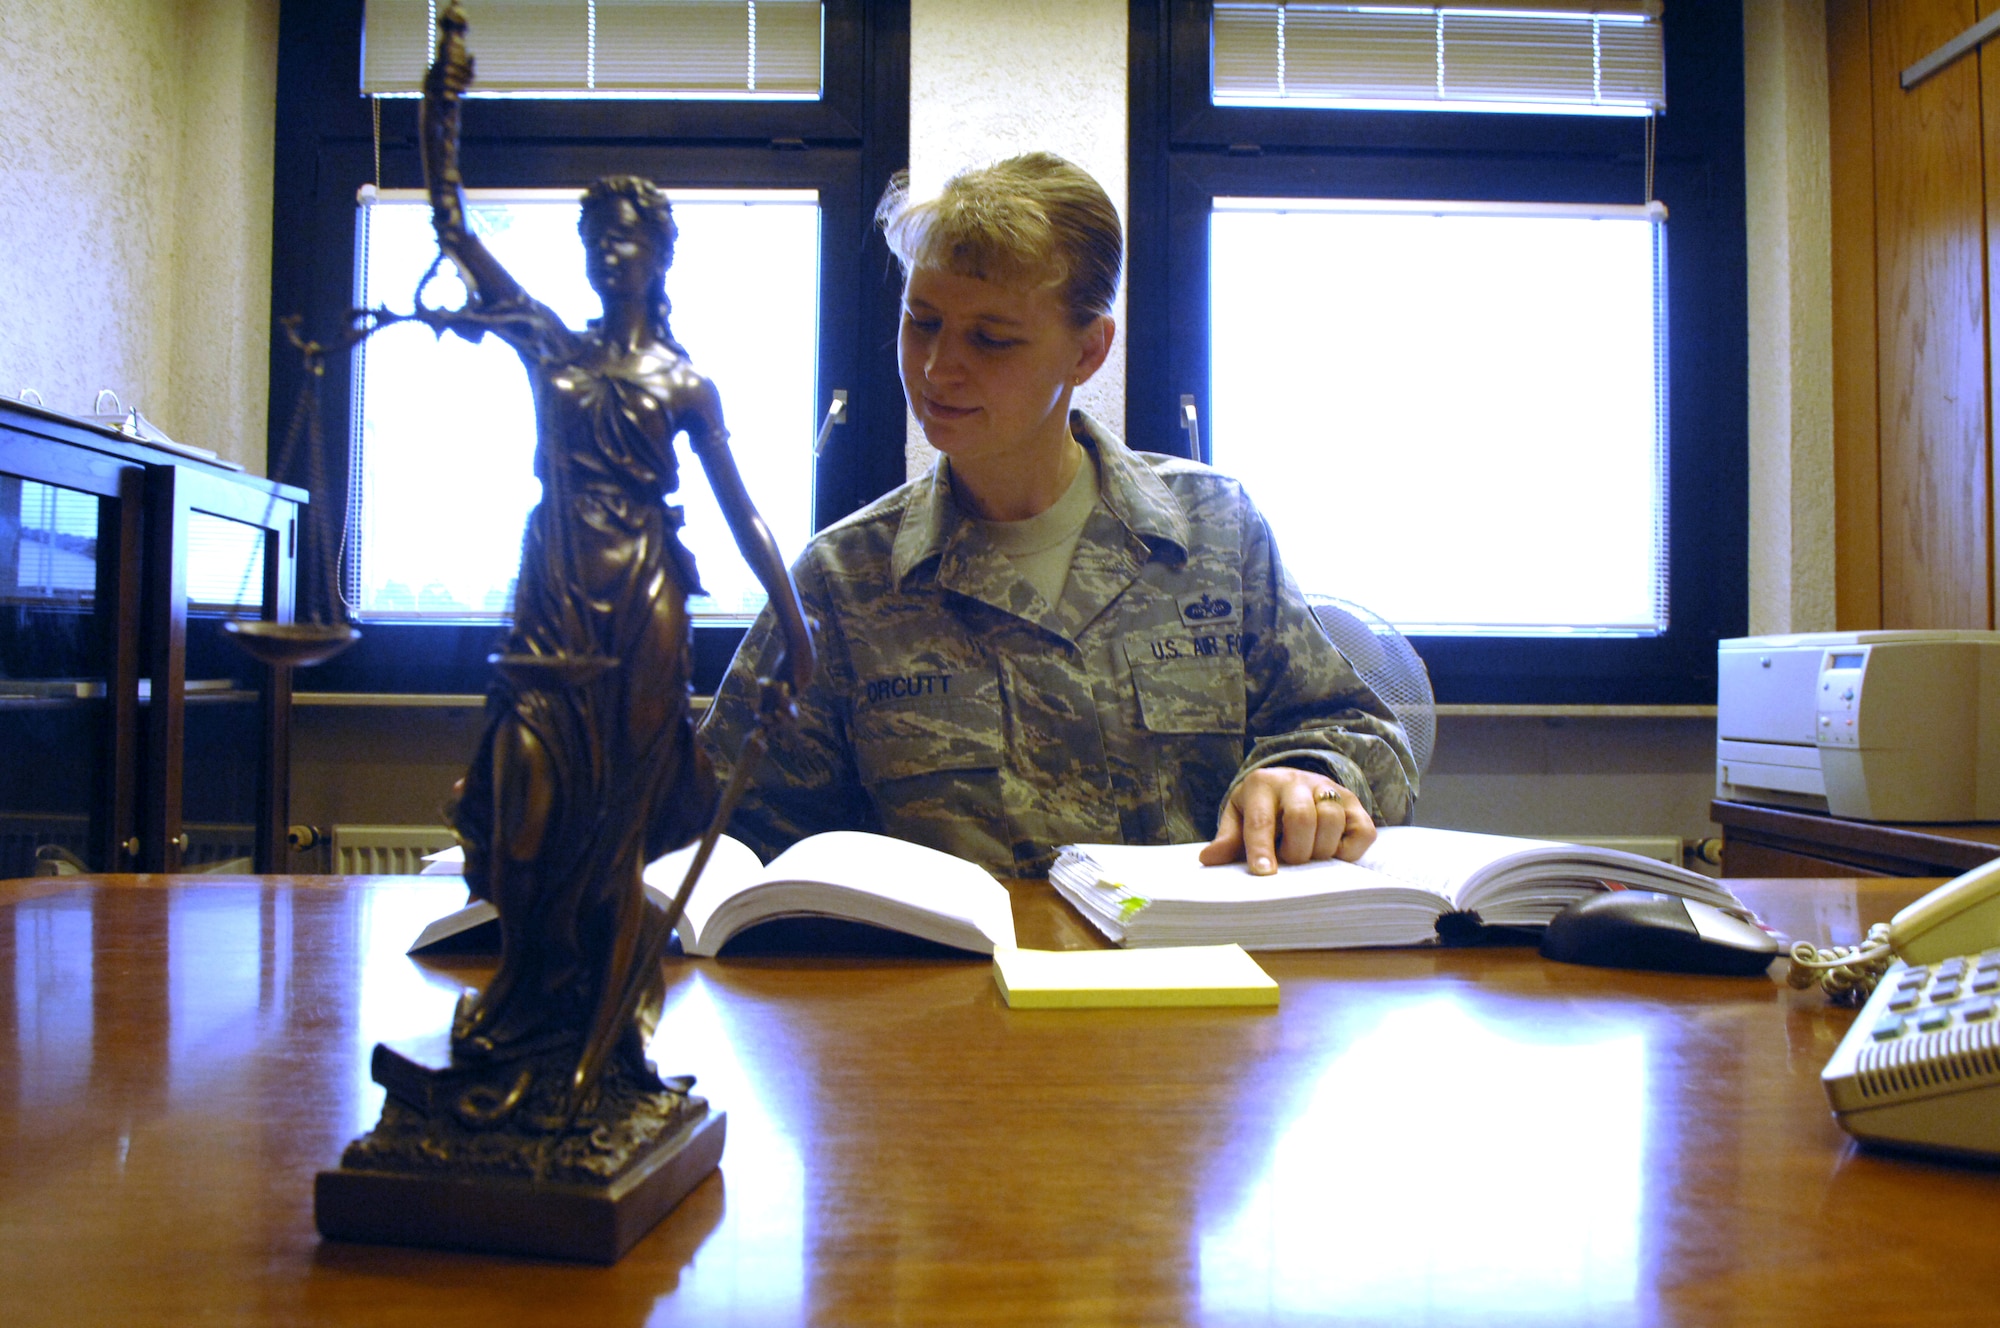 Master Sgt. Kristen Orcutt, 435th Air Base Wing paralegal reviews the Manual for Courts-Martial for court-martial case preparation.  Sergeant Orcutt, an 18 year Air Force veteran, retrained to be an Air Force paralegal eight years ago. (Air Force photo by Tech. Sgt. Michael Voss)